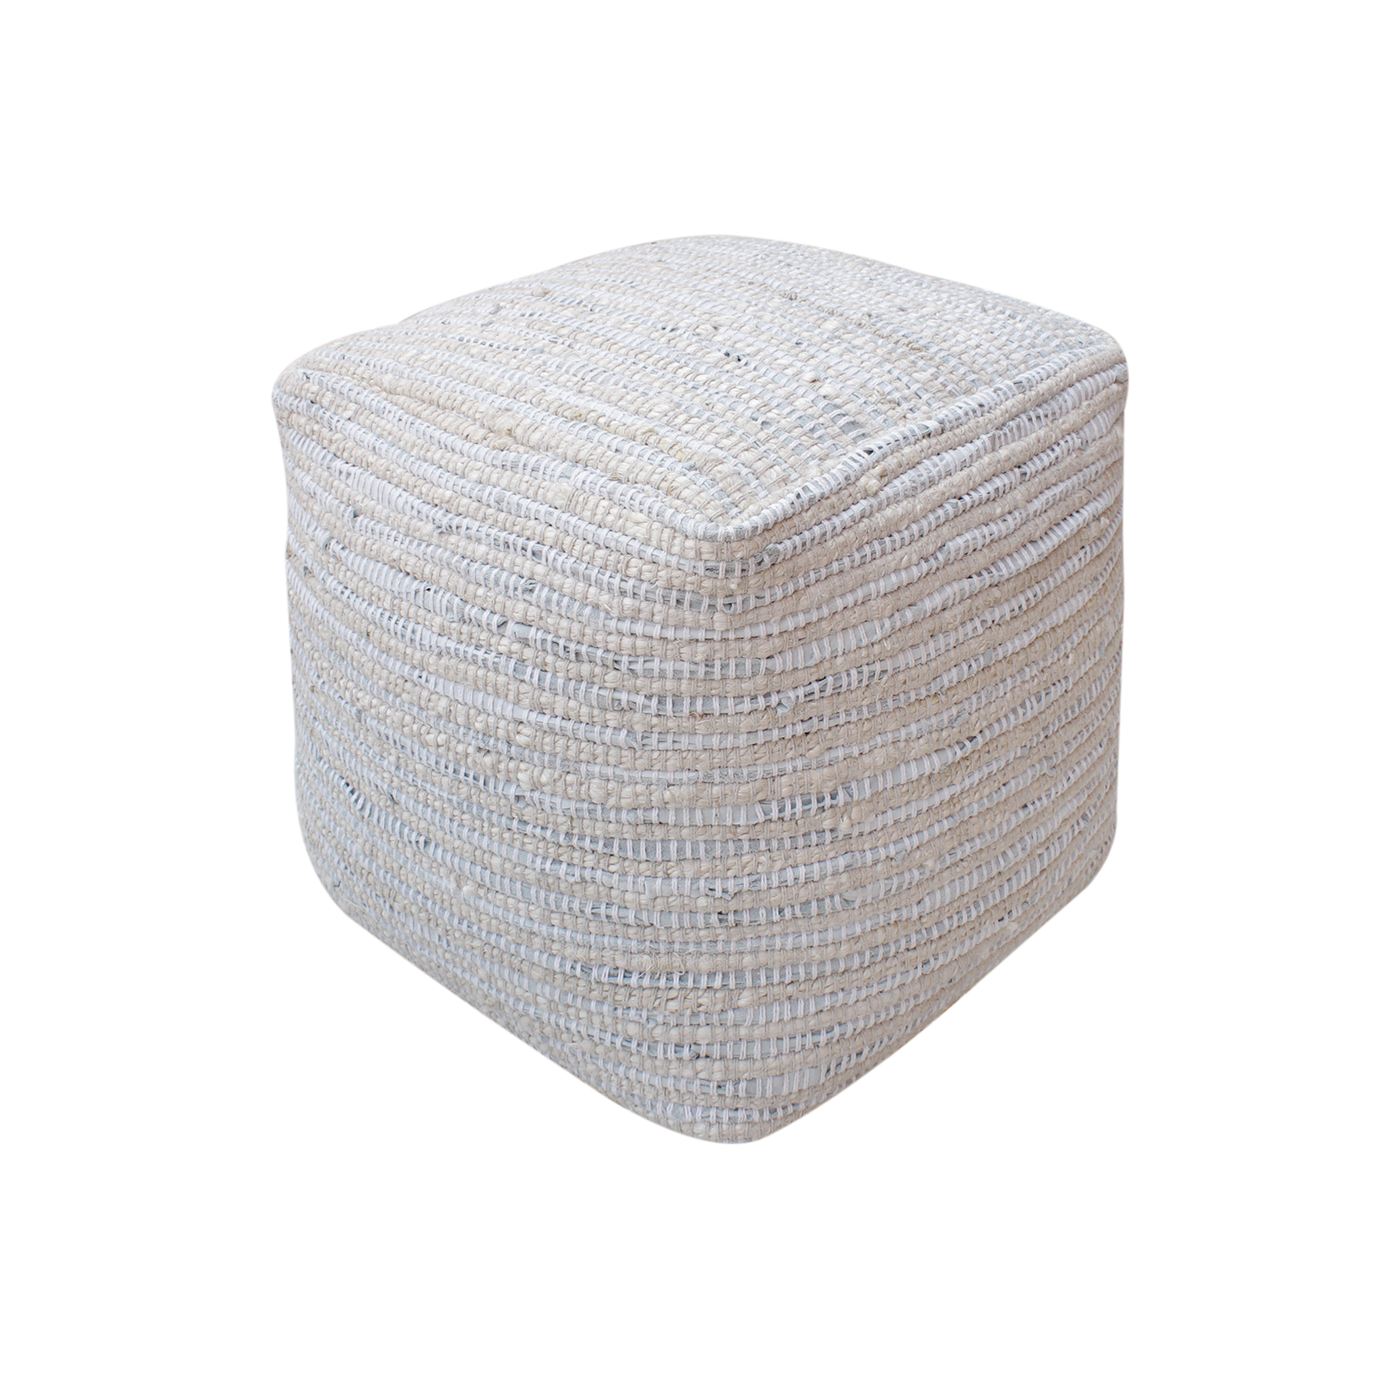 Capulin Pouf, Leather, Jute, Natural White, PITLOOM / FLAT WEAVE